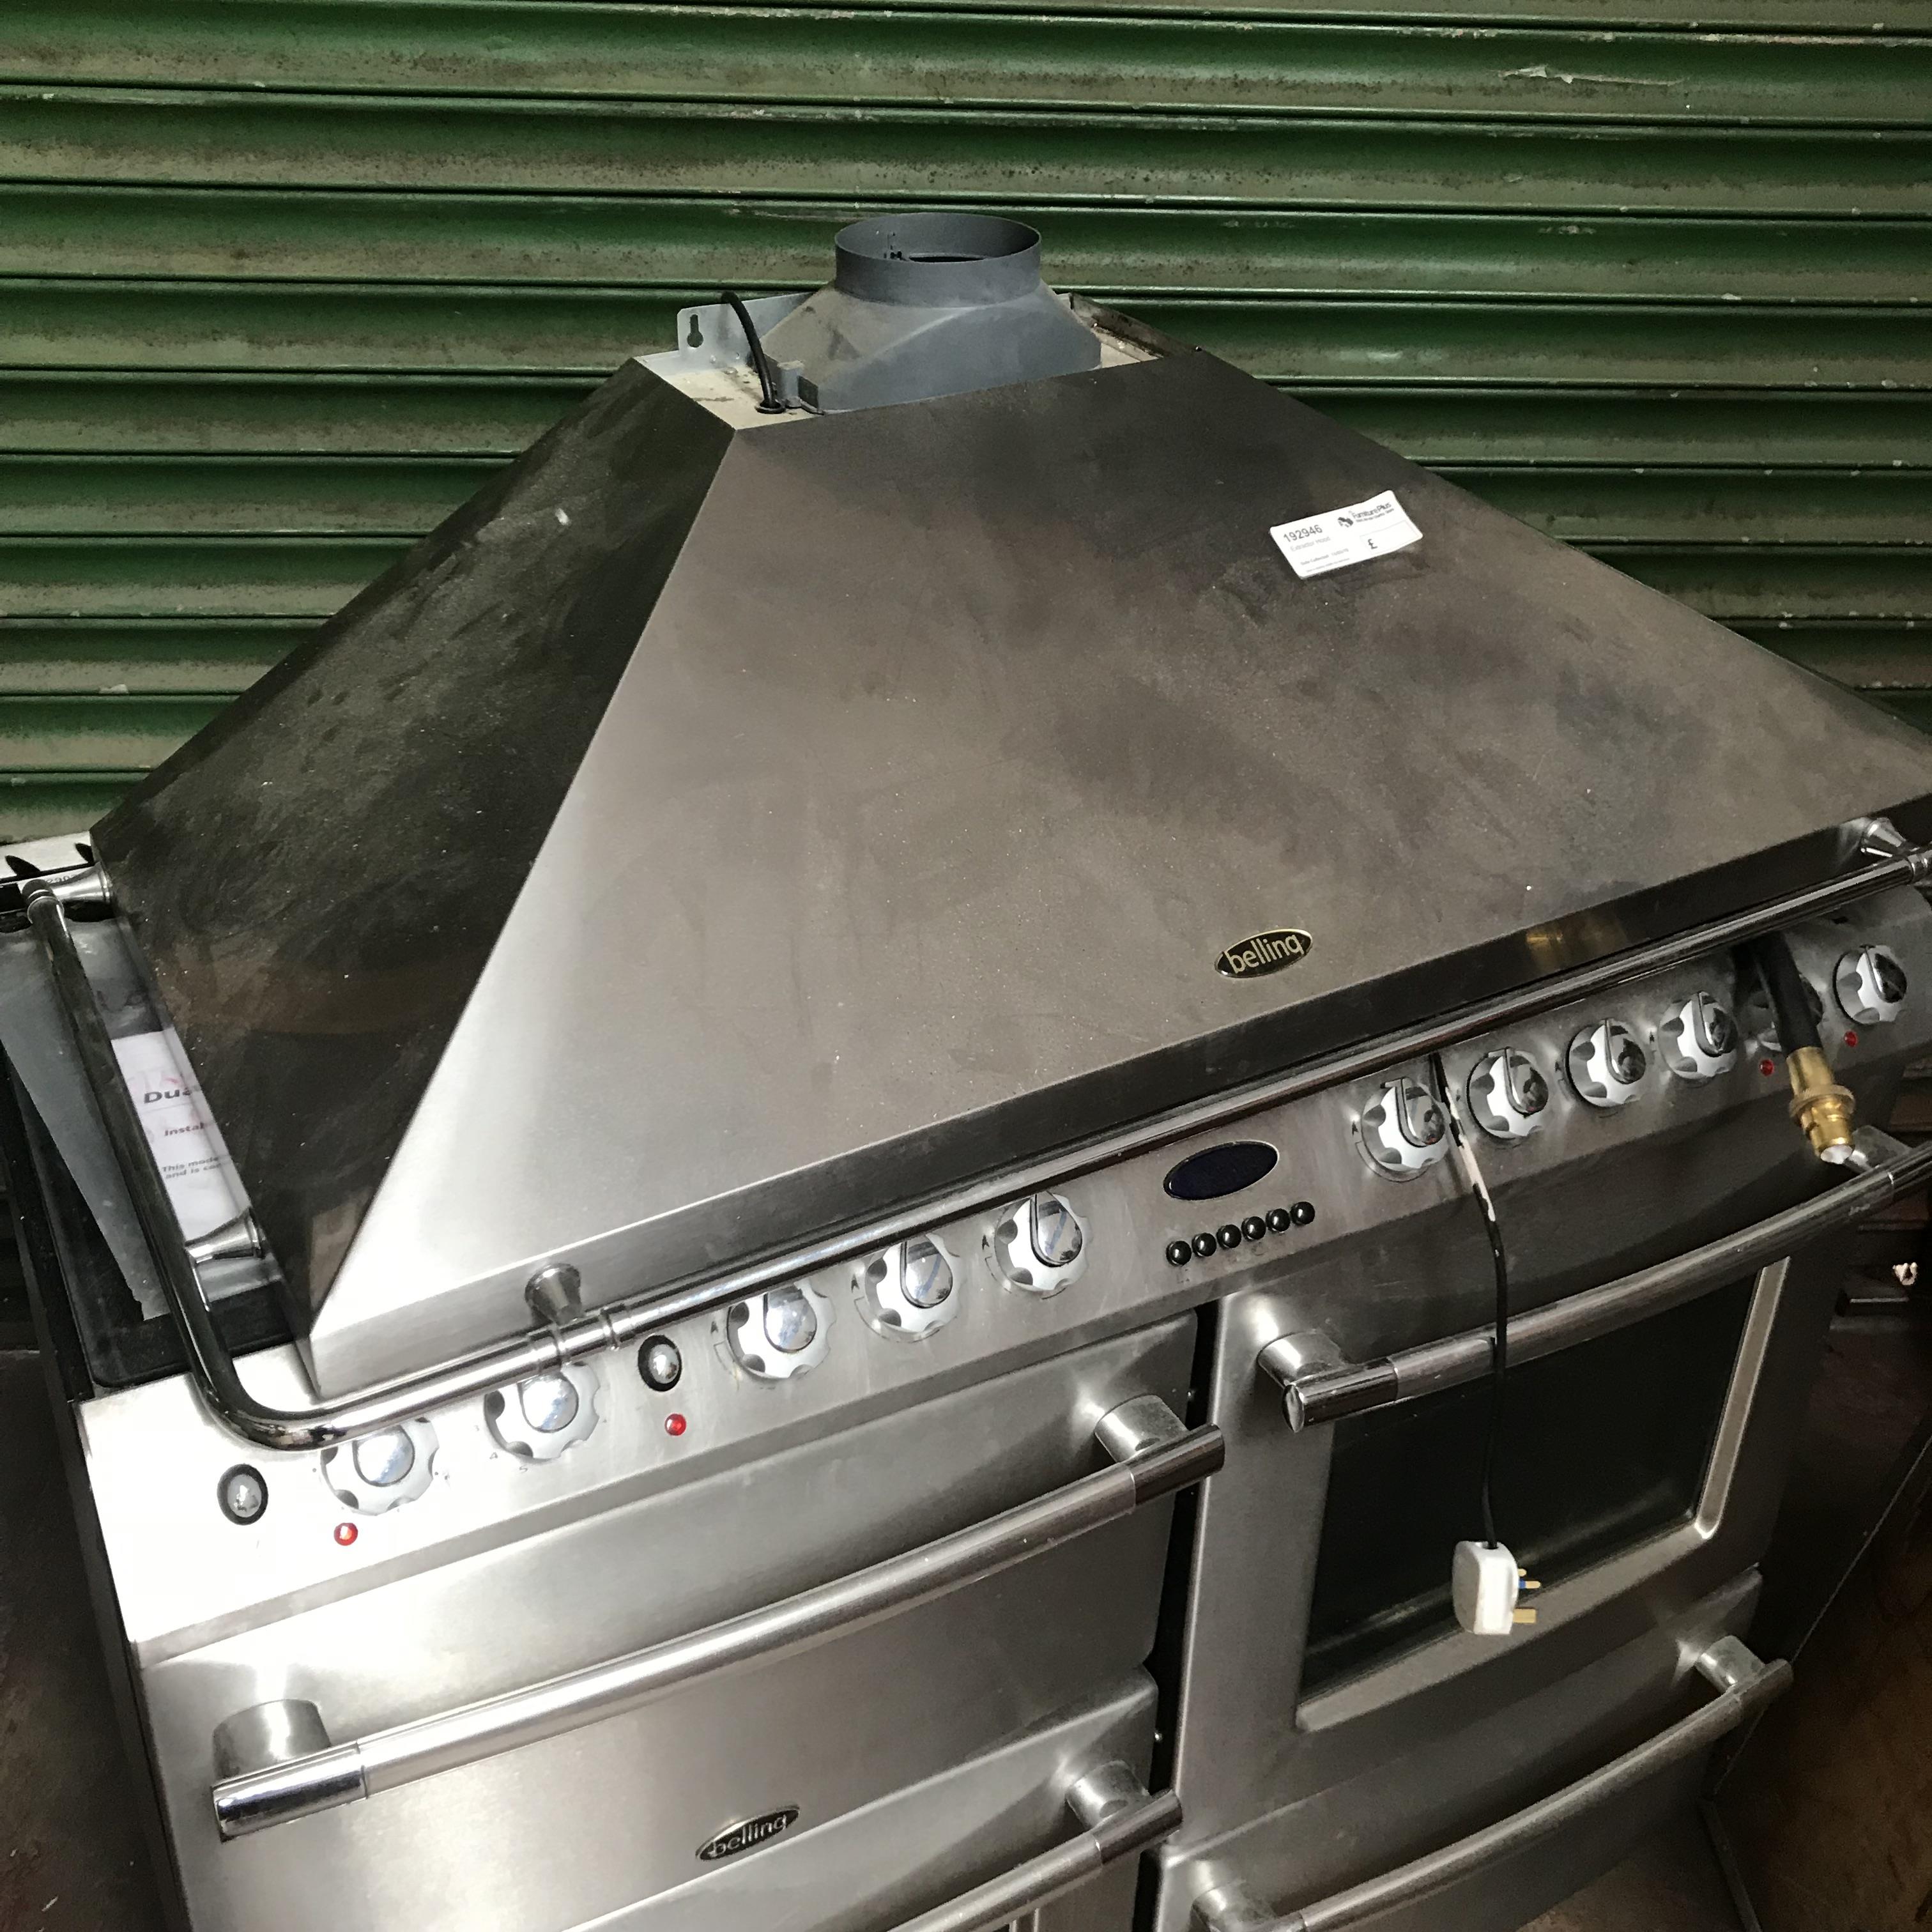 Belling dual fuel cooker (gas) stainless steel front, glass lift top, instructions and comes with Be - Image 3 of 3